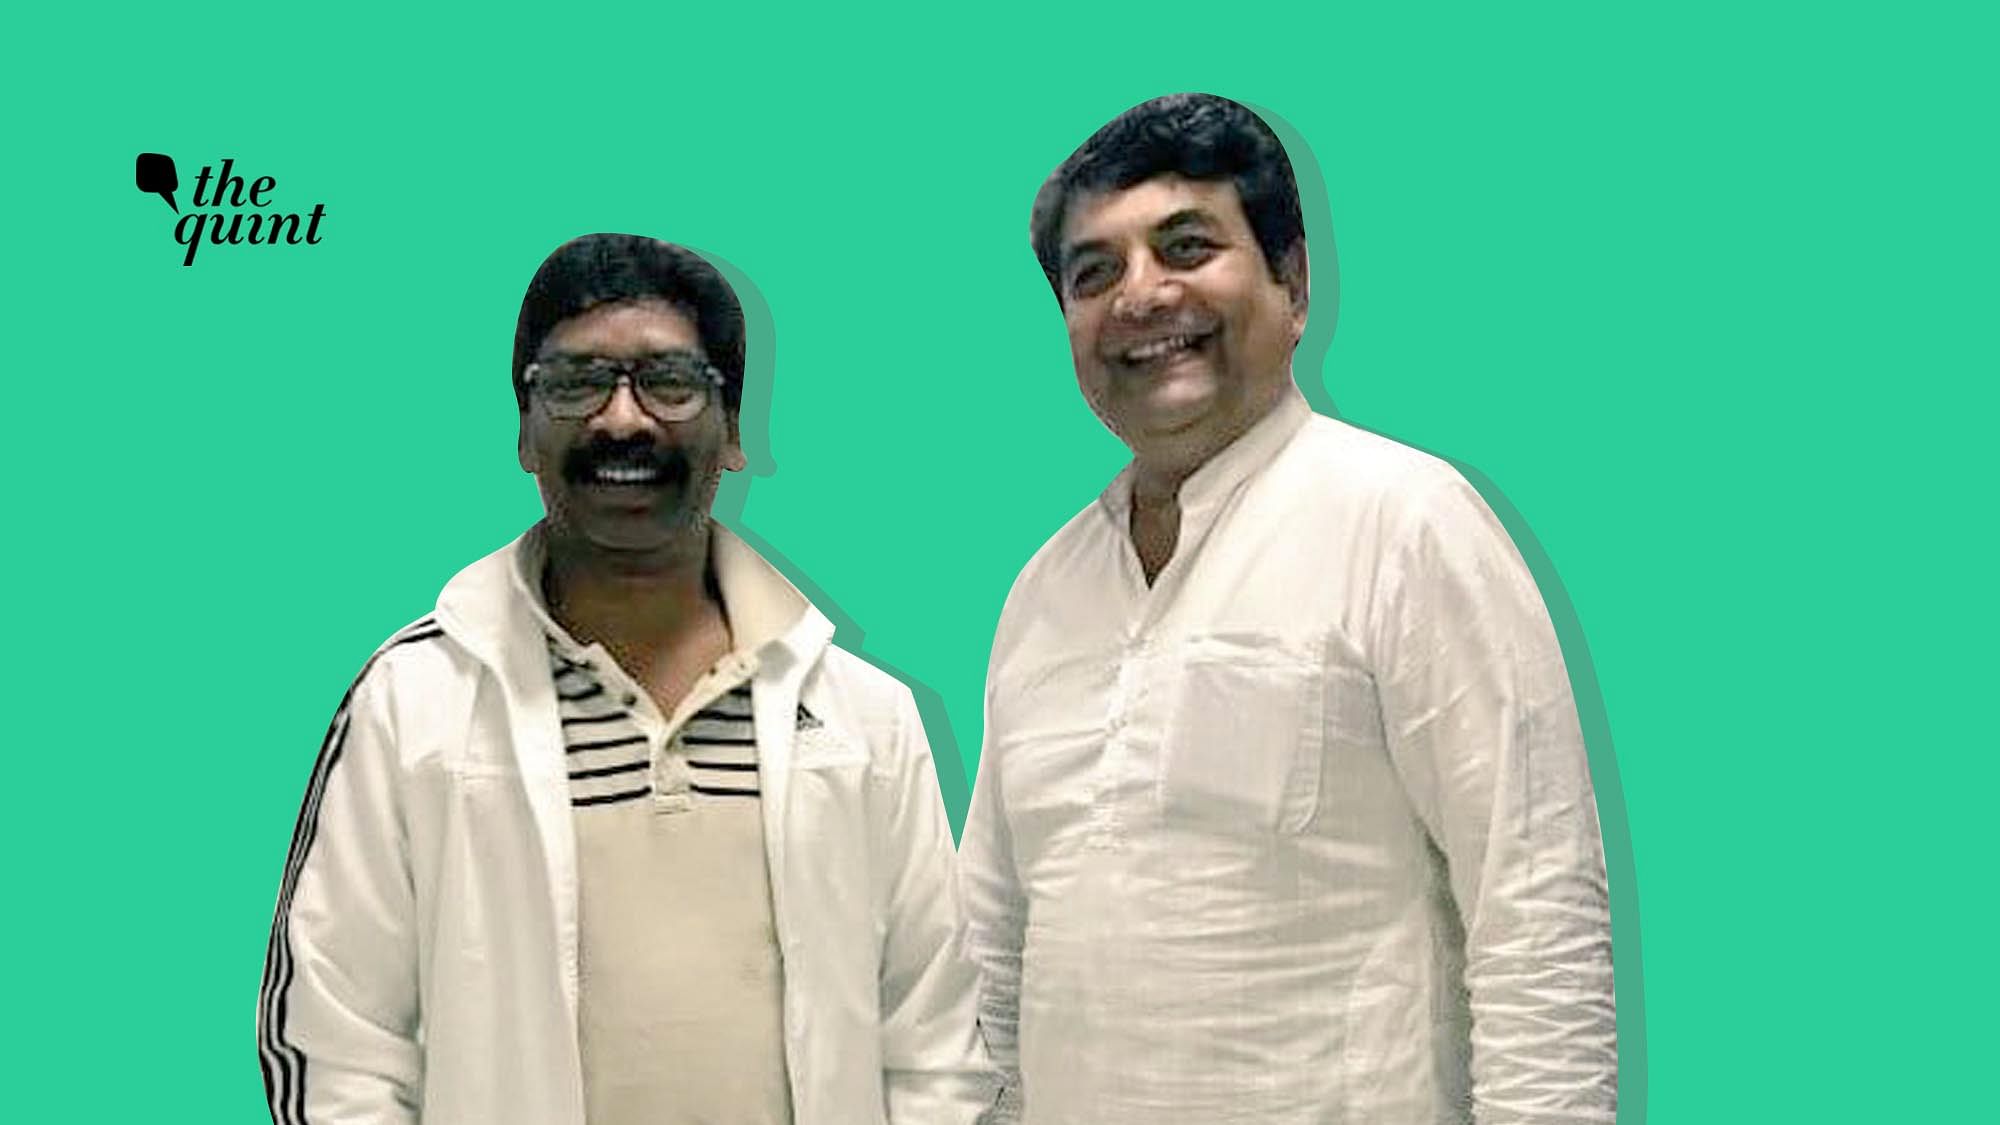 JMM Chief Hemant Soren and Congress’ Jharkhand In Charge RPN Singh announced the alliance for the upcoming Jharkhand polls.